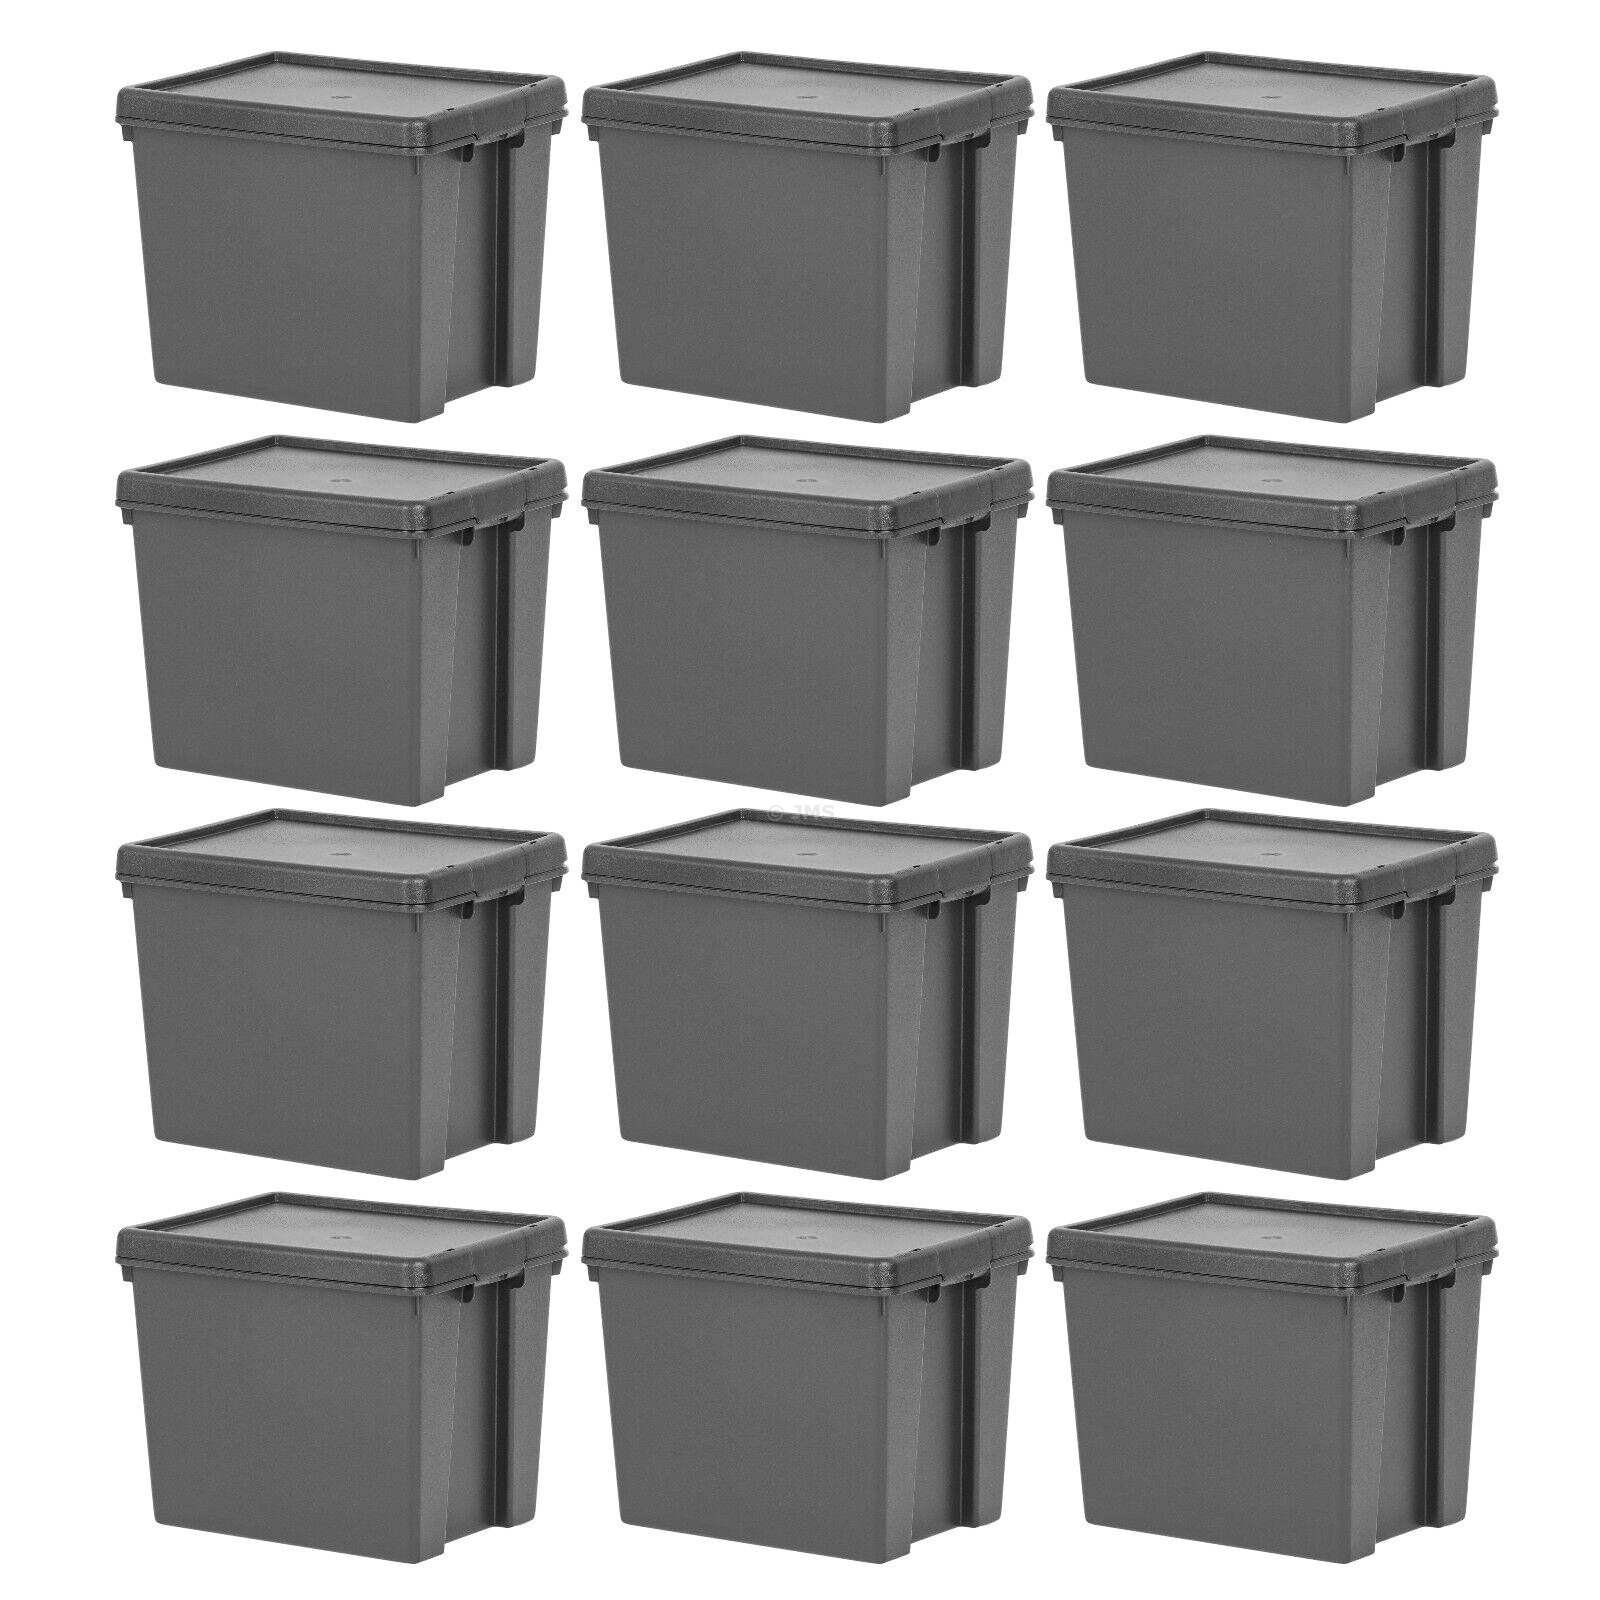 BULK DEAL BOX of 12 - Heavy Duty Black 24L Storage Box with Lid Strong Boxes Stackable Nestable Containers Home Office